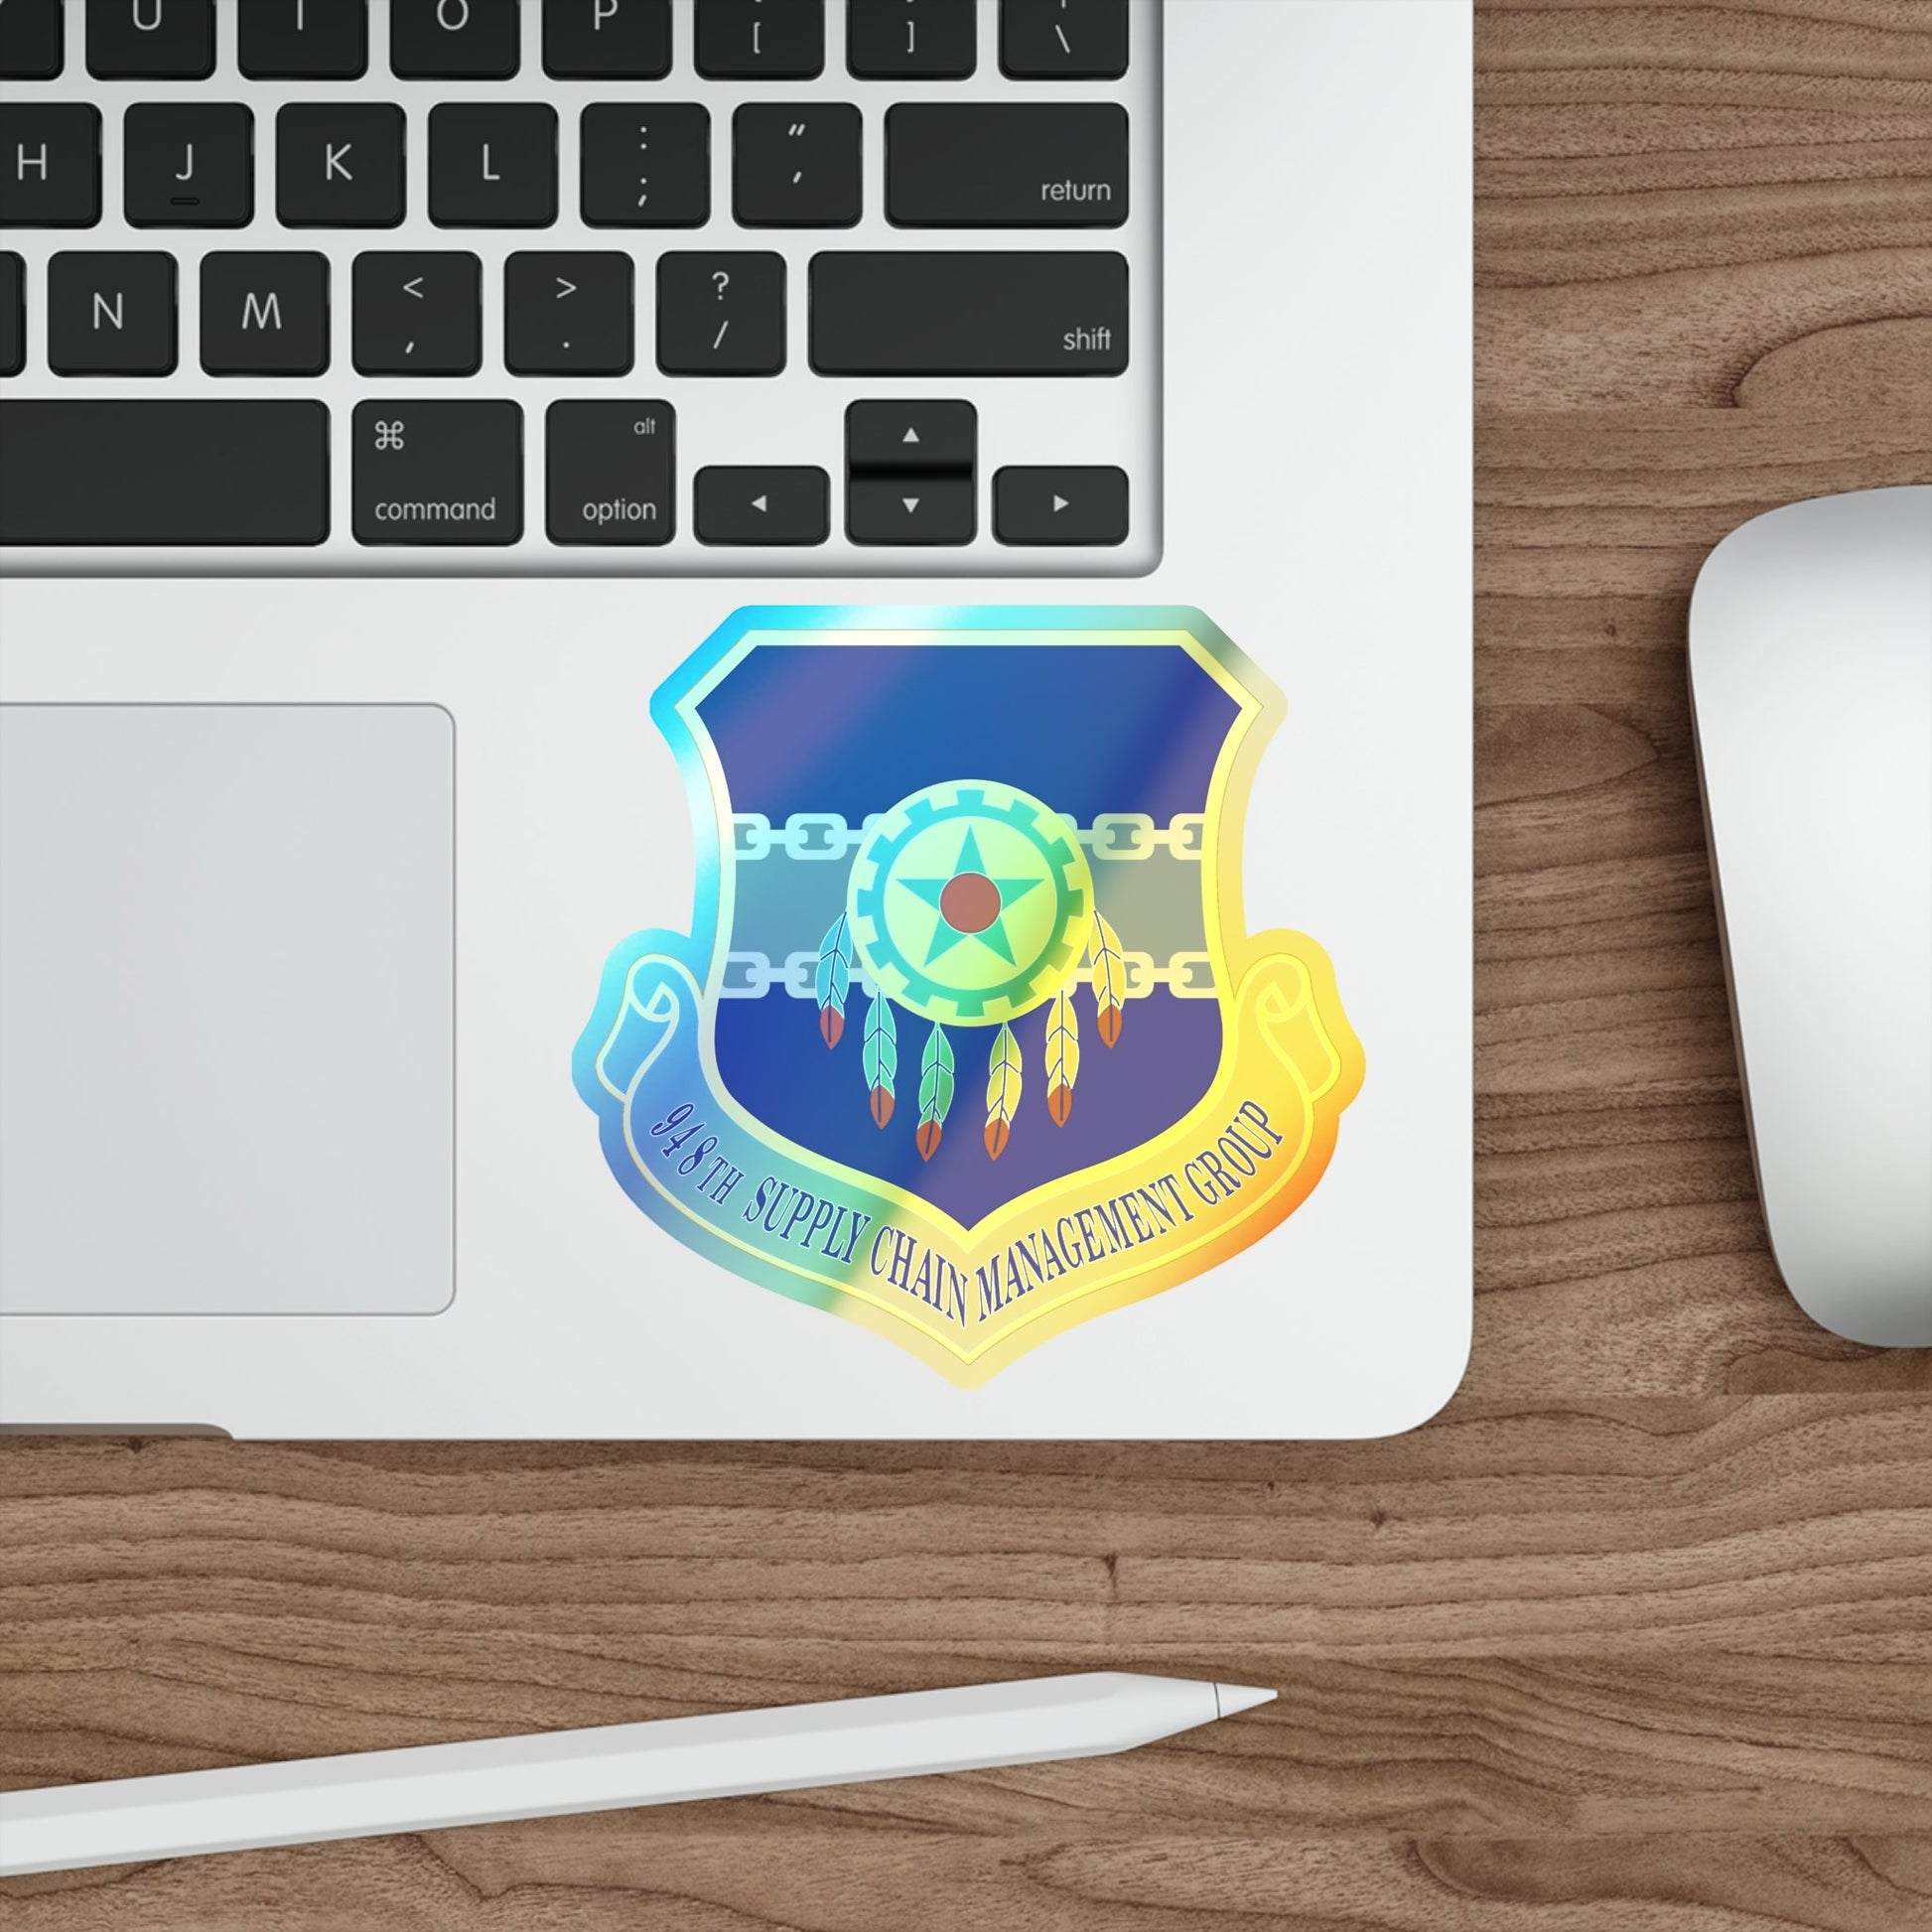 948 Supply Chain Management Group AFMC (U.S. Air Force) Holographic STICKER Die-Cut Vinyl Decal-The Sticker Space